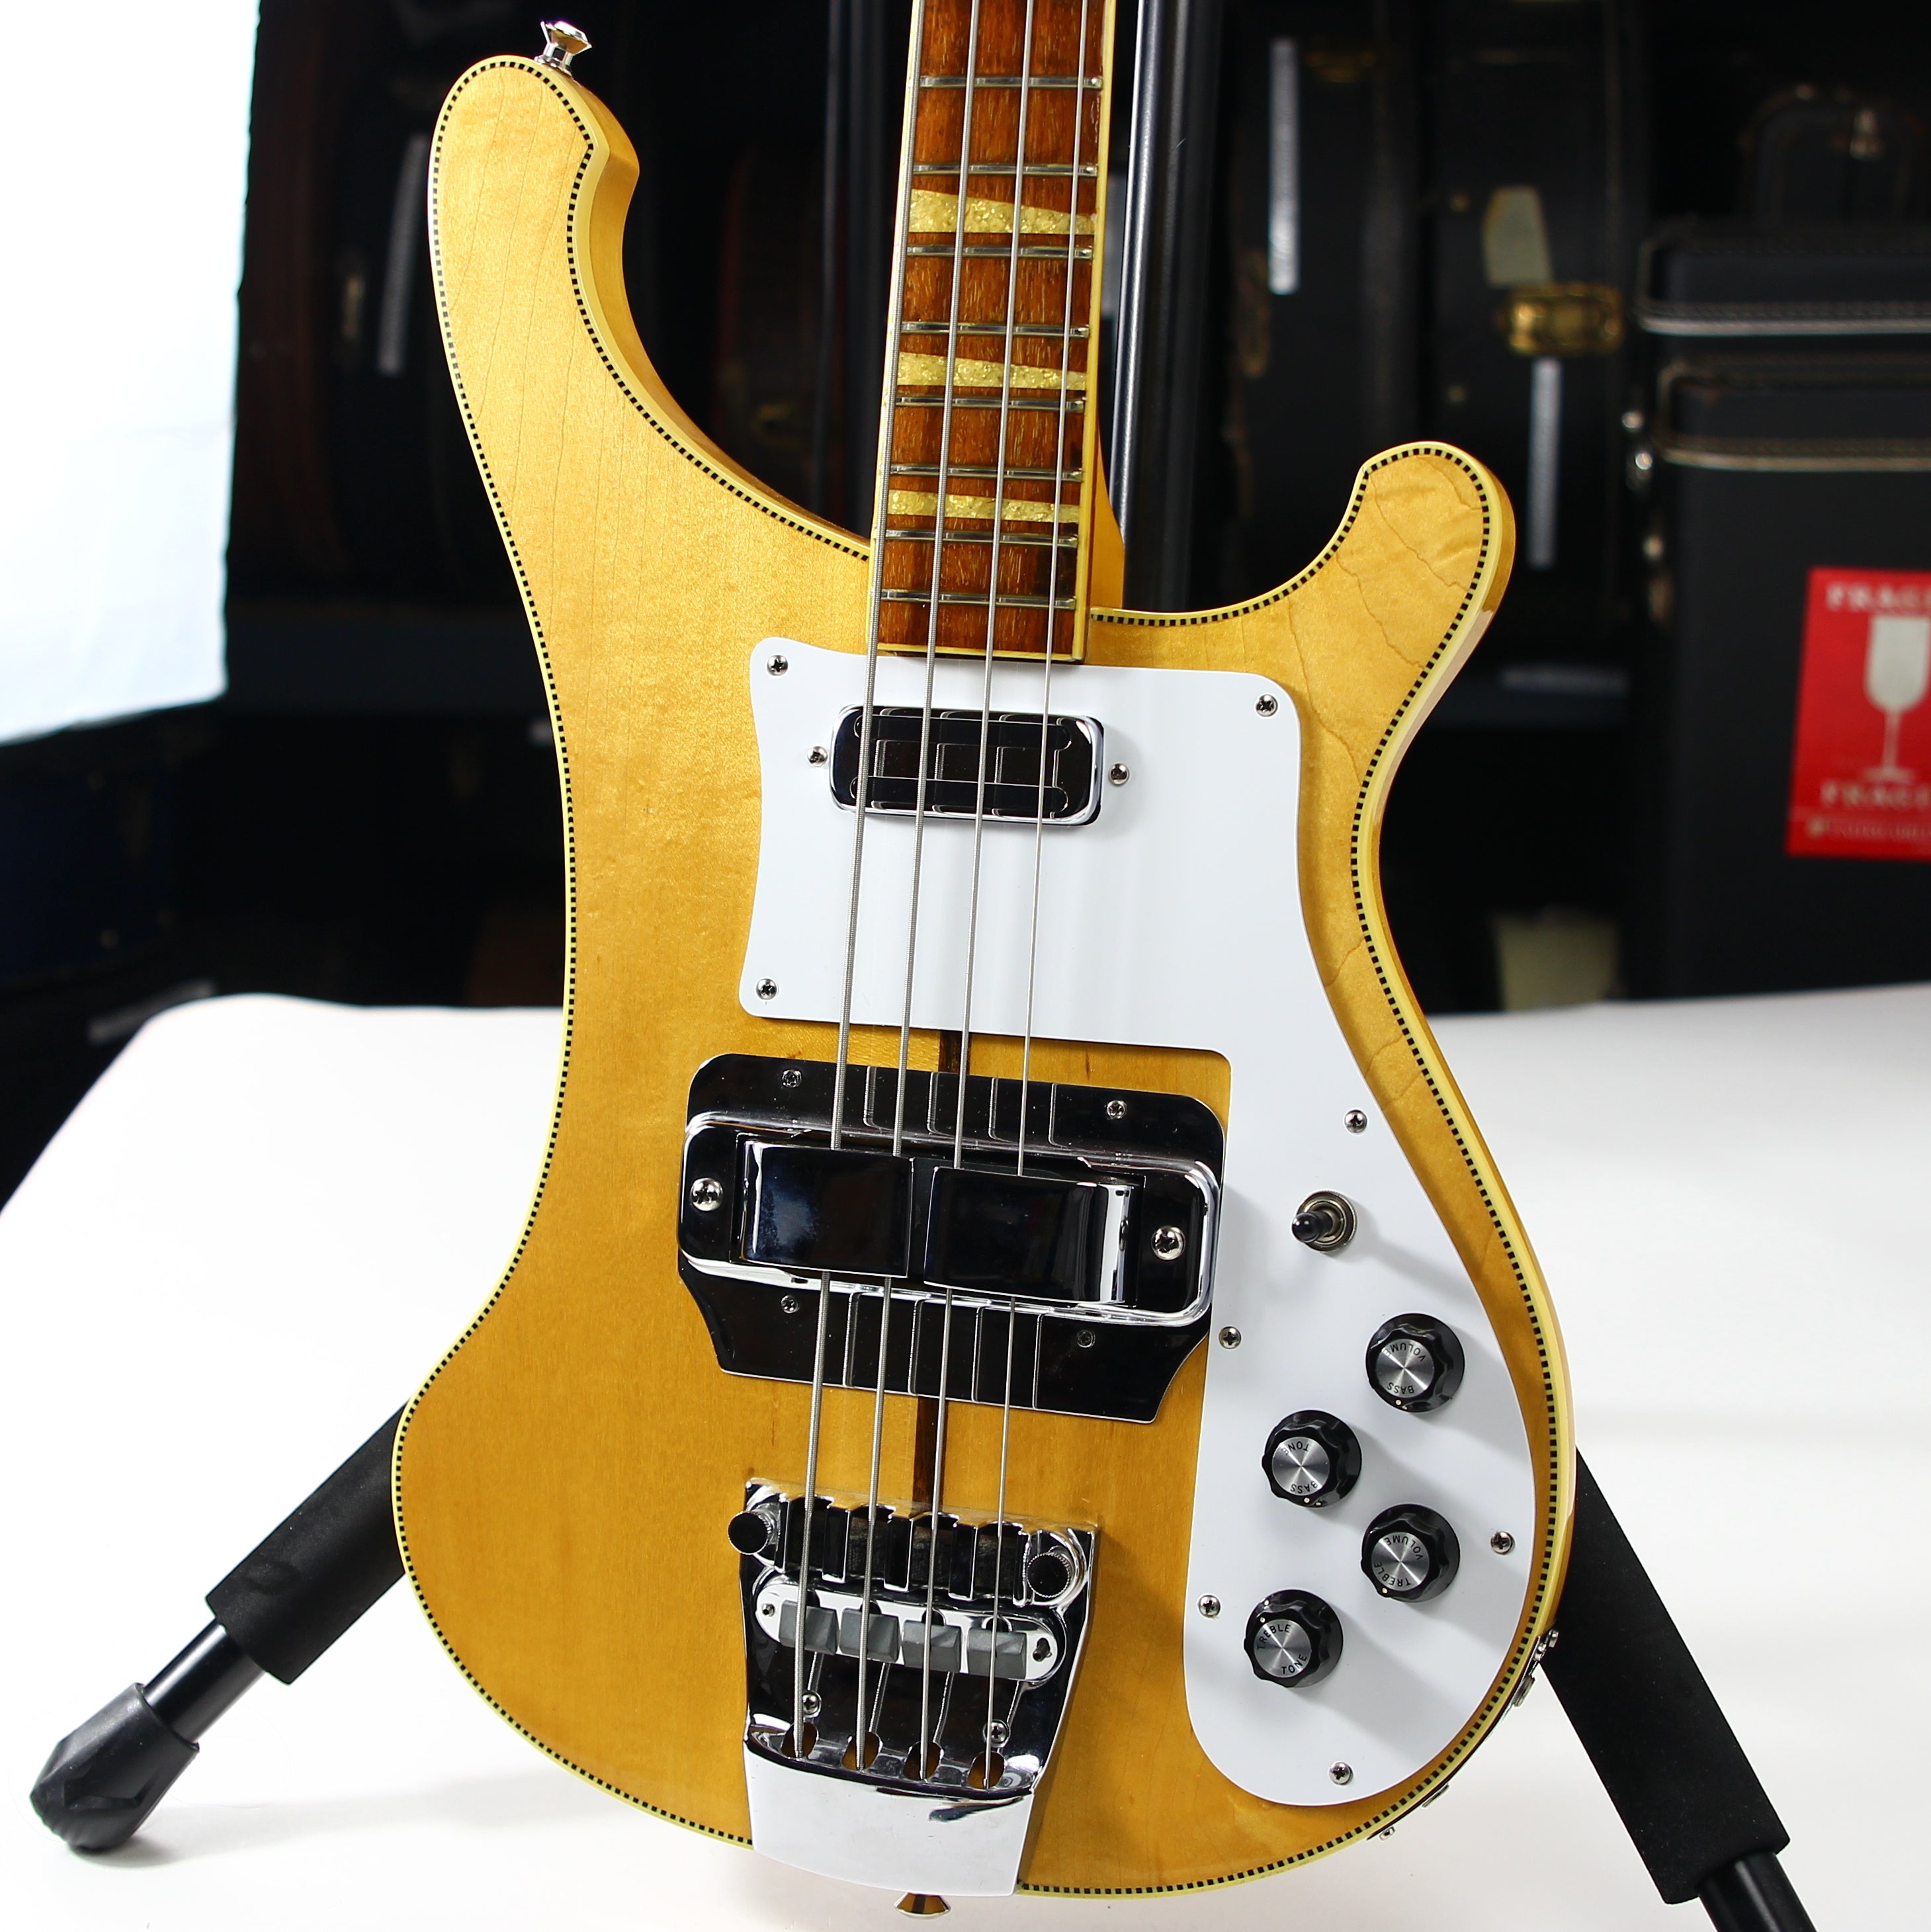 1972 Rickenbacker 4001 Mapleglo Vintage Electric Bass Guitar | Checkerboard Binding, Toaster Pickup, Full Crushed Pearl Inlays!